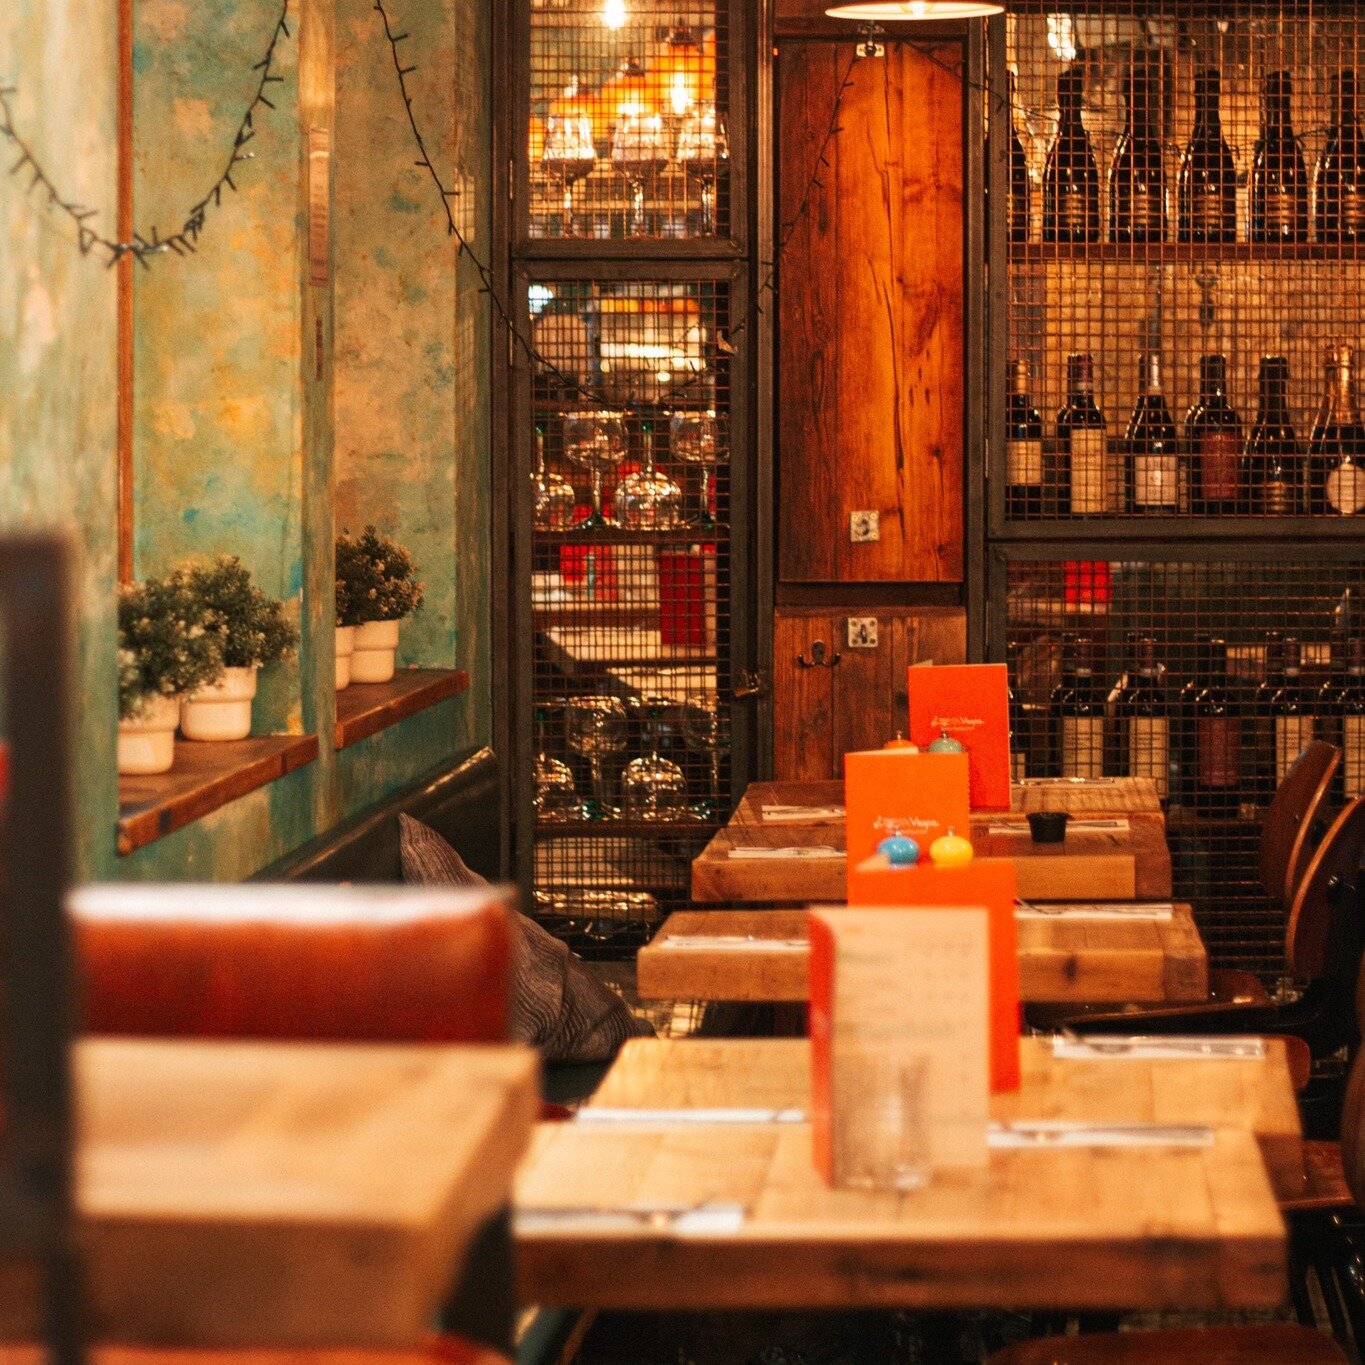 Our Leicester Square restaurant offers the perfect cosy spot for warm meals, wine or cocktails. What are you looking forward to this weekend?

#WindyEscape #JanuaryJoy #cosyvibes #quaintitalian #VespaVibes #traditionalitalian #GoodVibesOnly #Leiceste